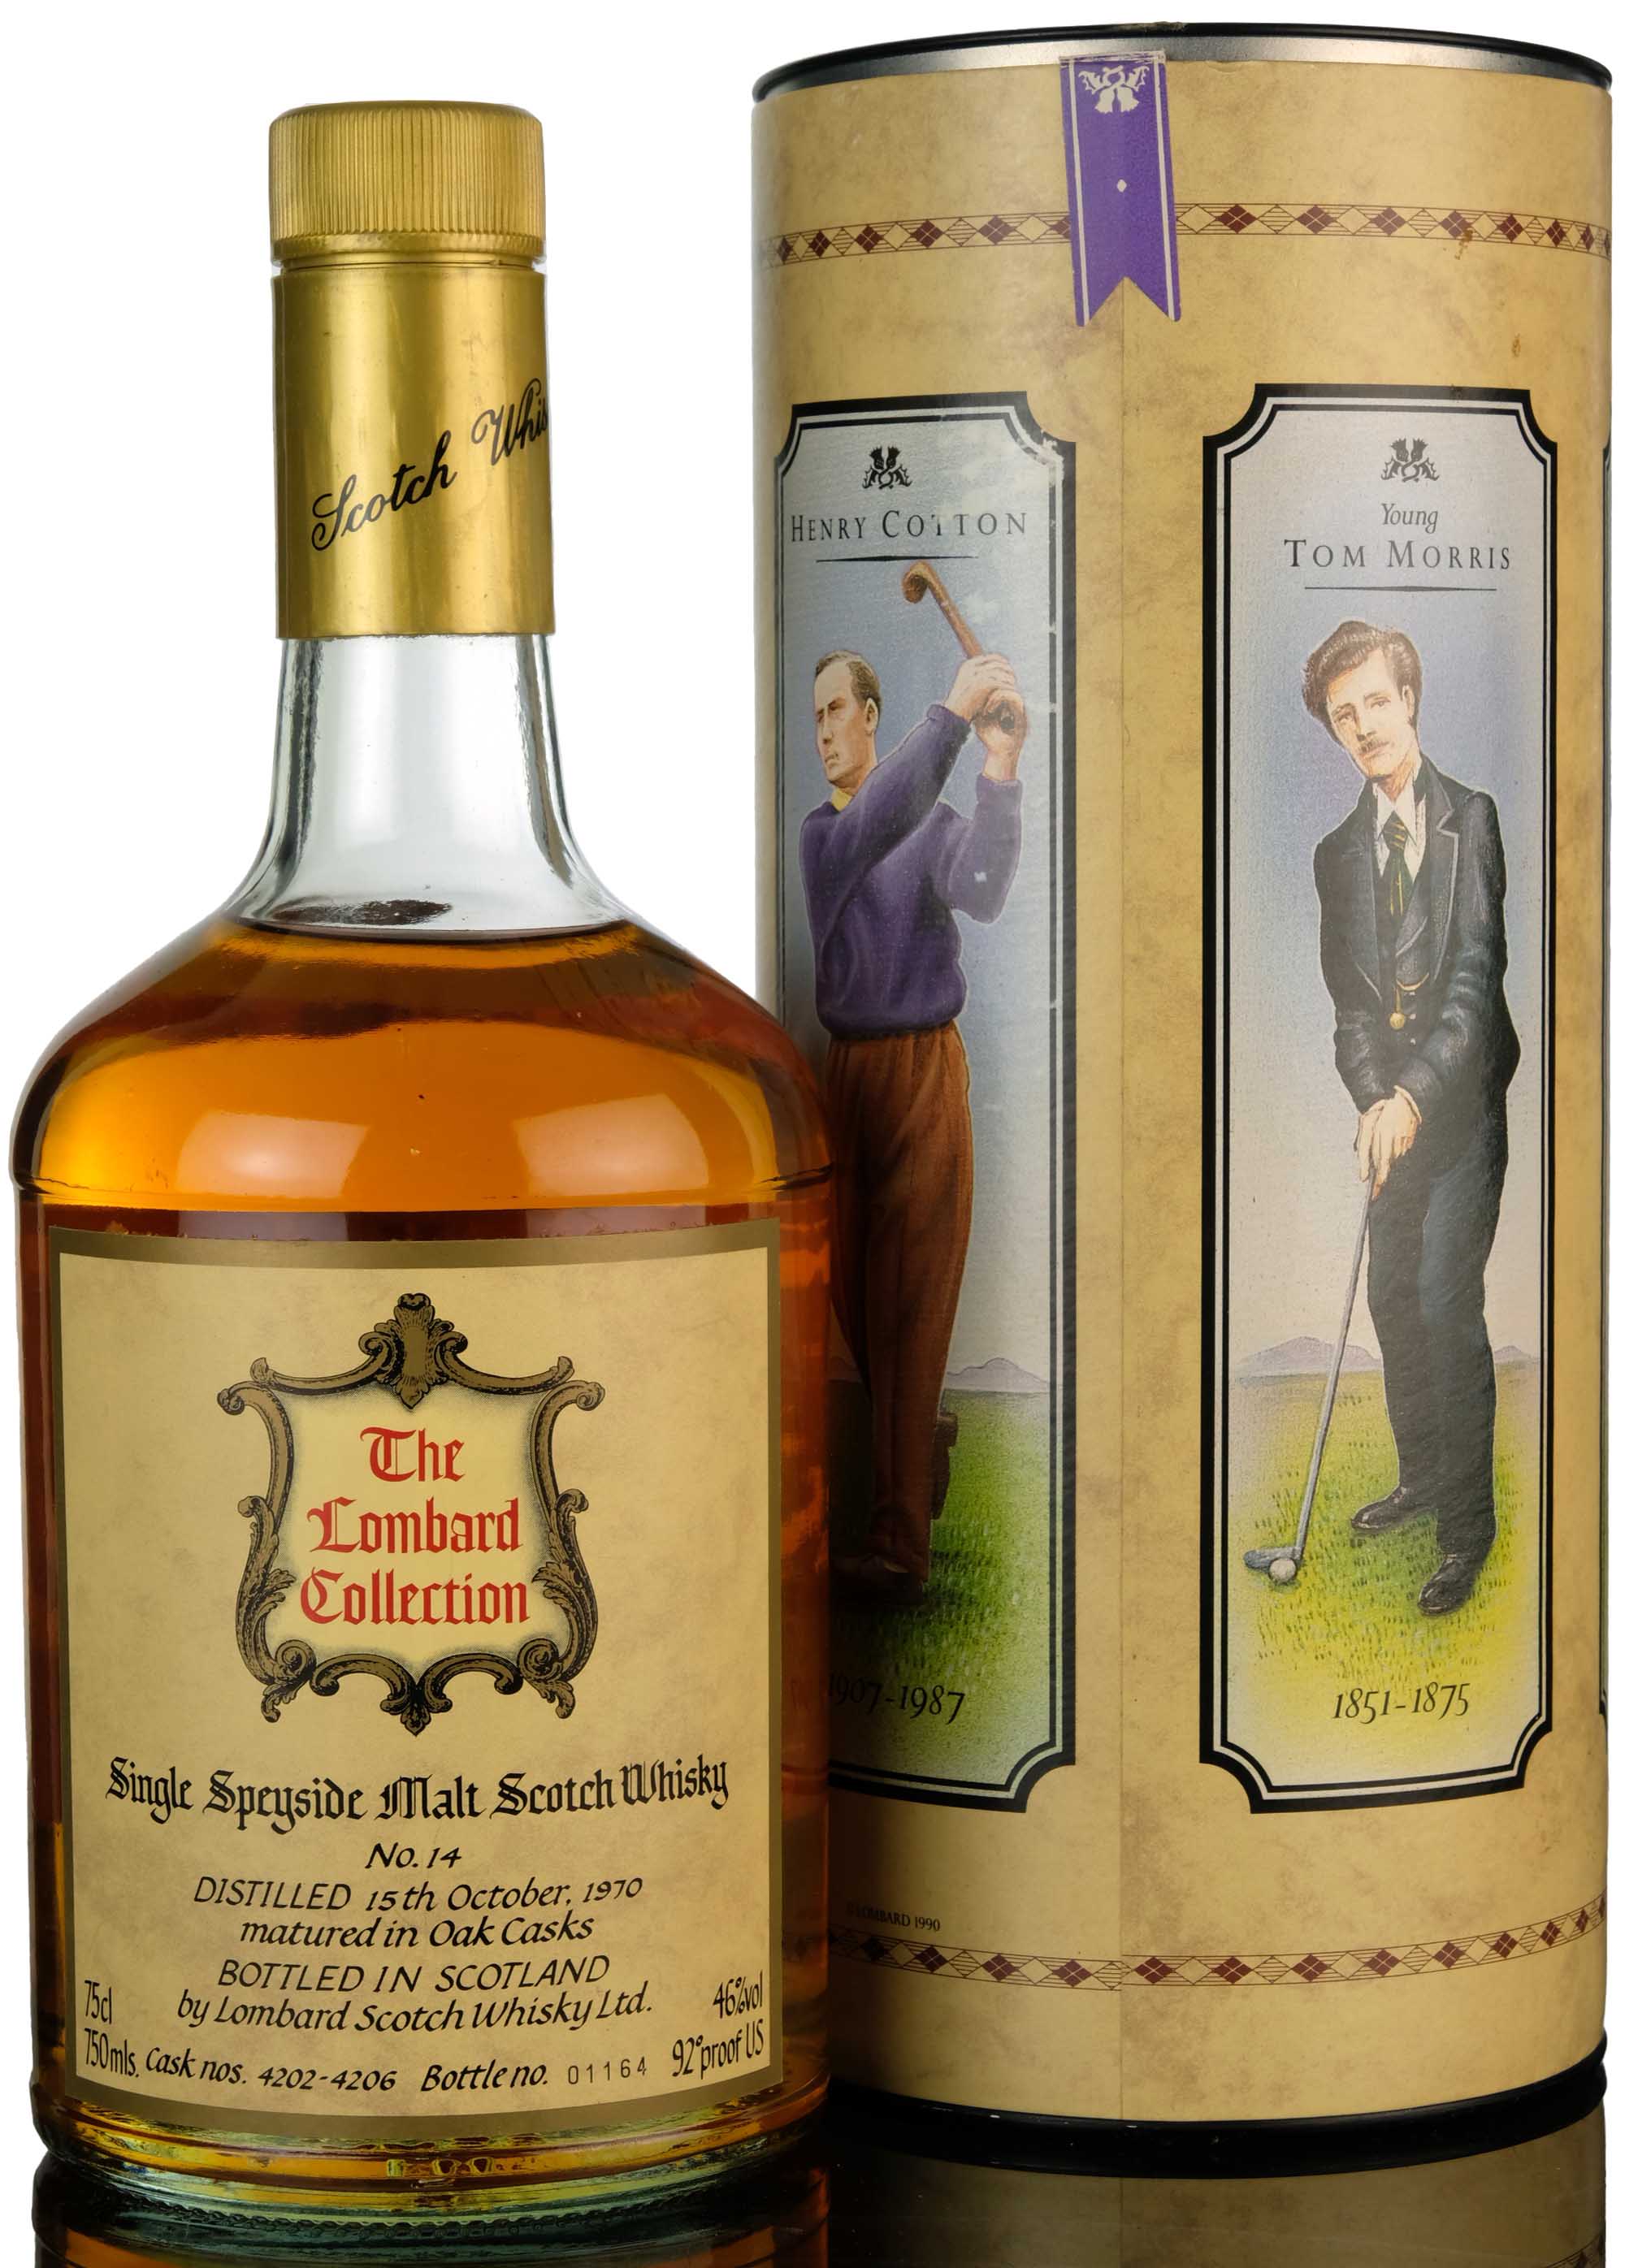 Aberlour 1970 - The Lombard Collection No14 The Golfing Greats - Casks 4202-4206